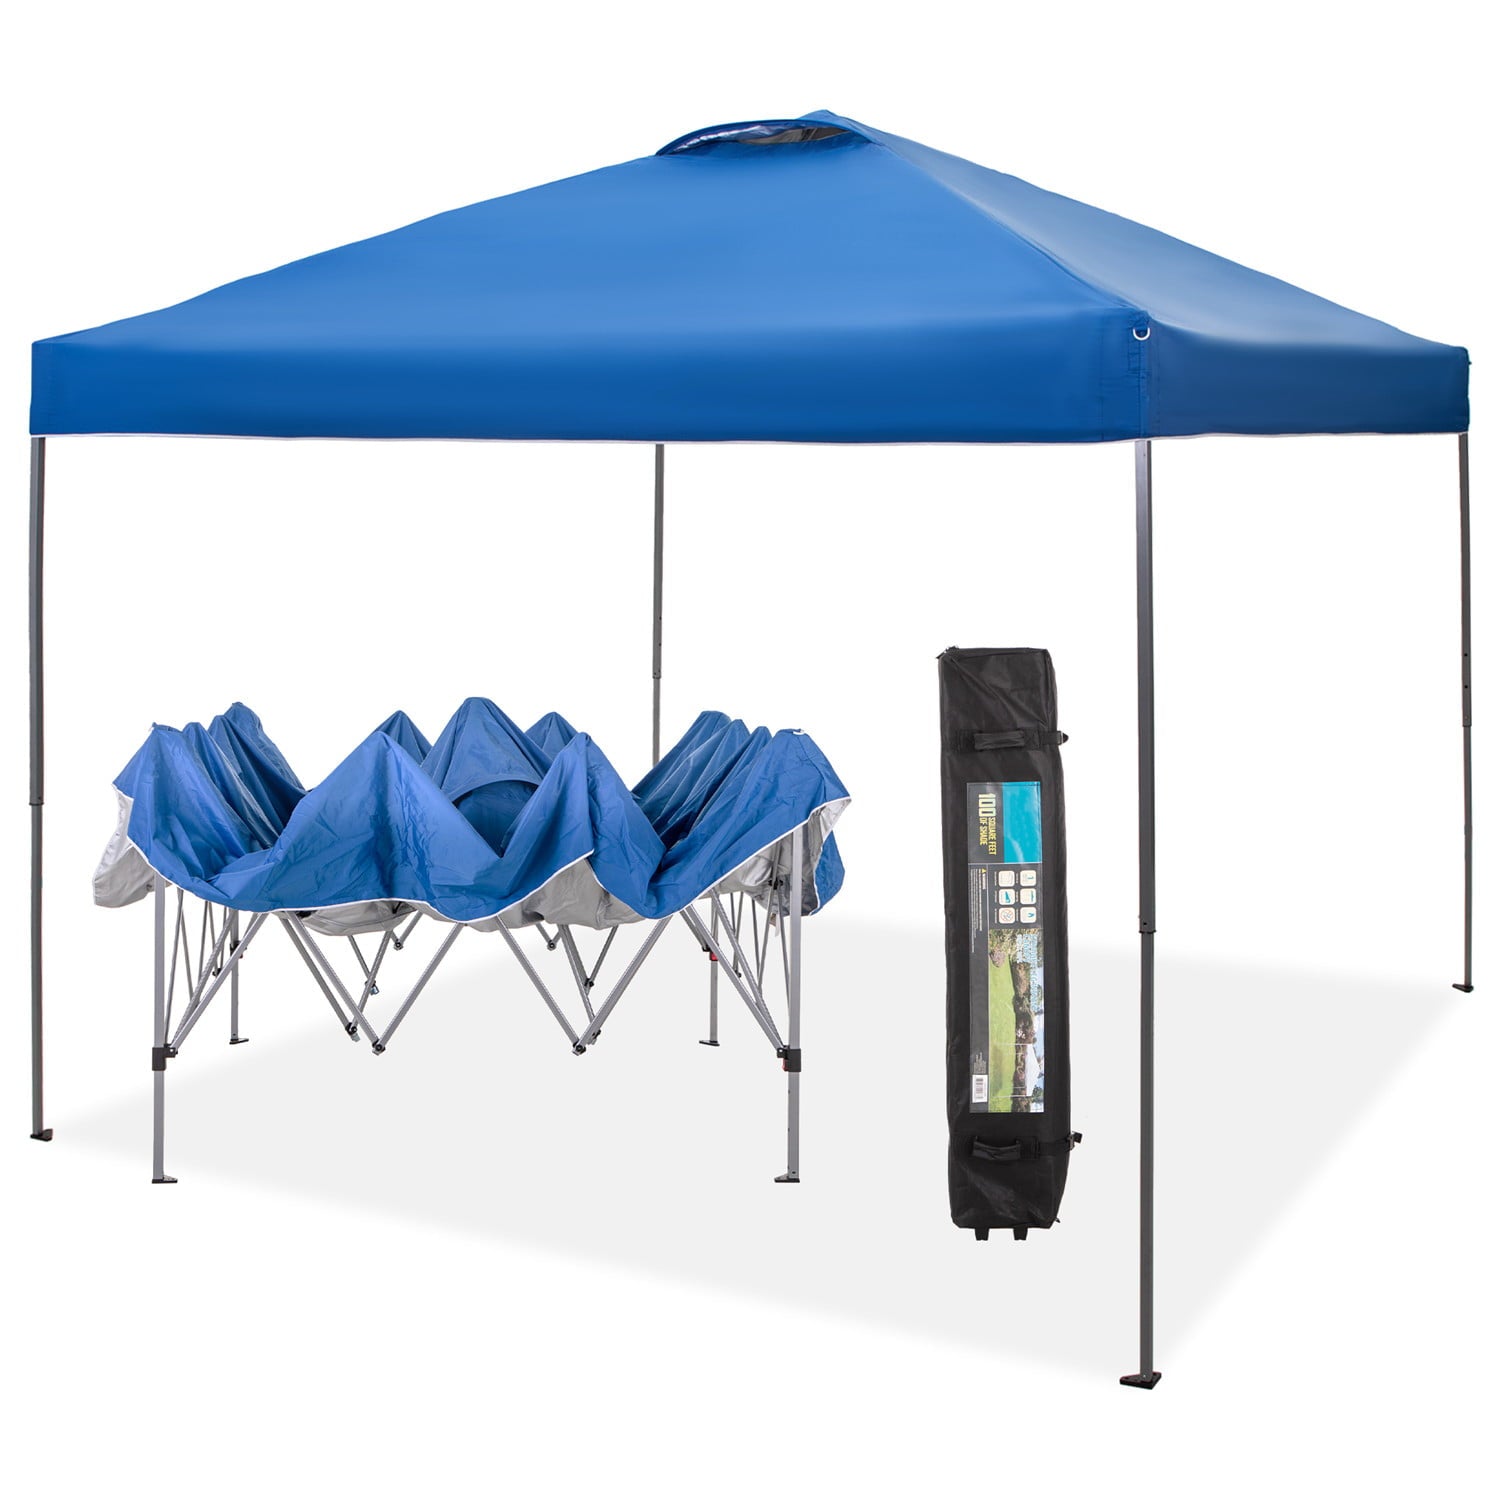 MF Studio 10x10ft Pop-up Canopy Tent Straight Legs Instant Canopy for Outside with Wheeled Bag - Blue